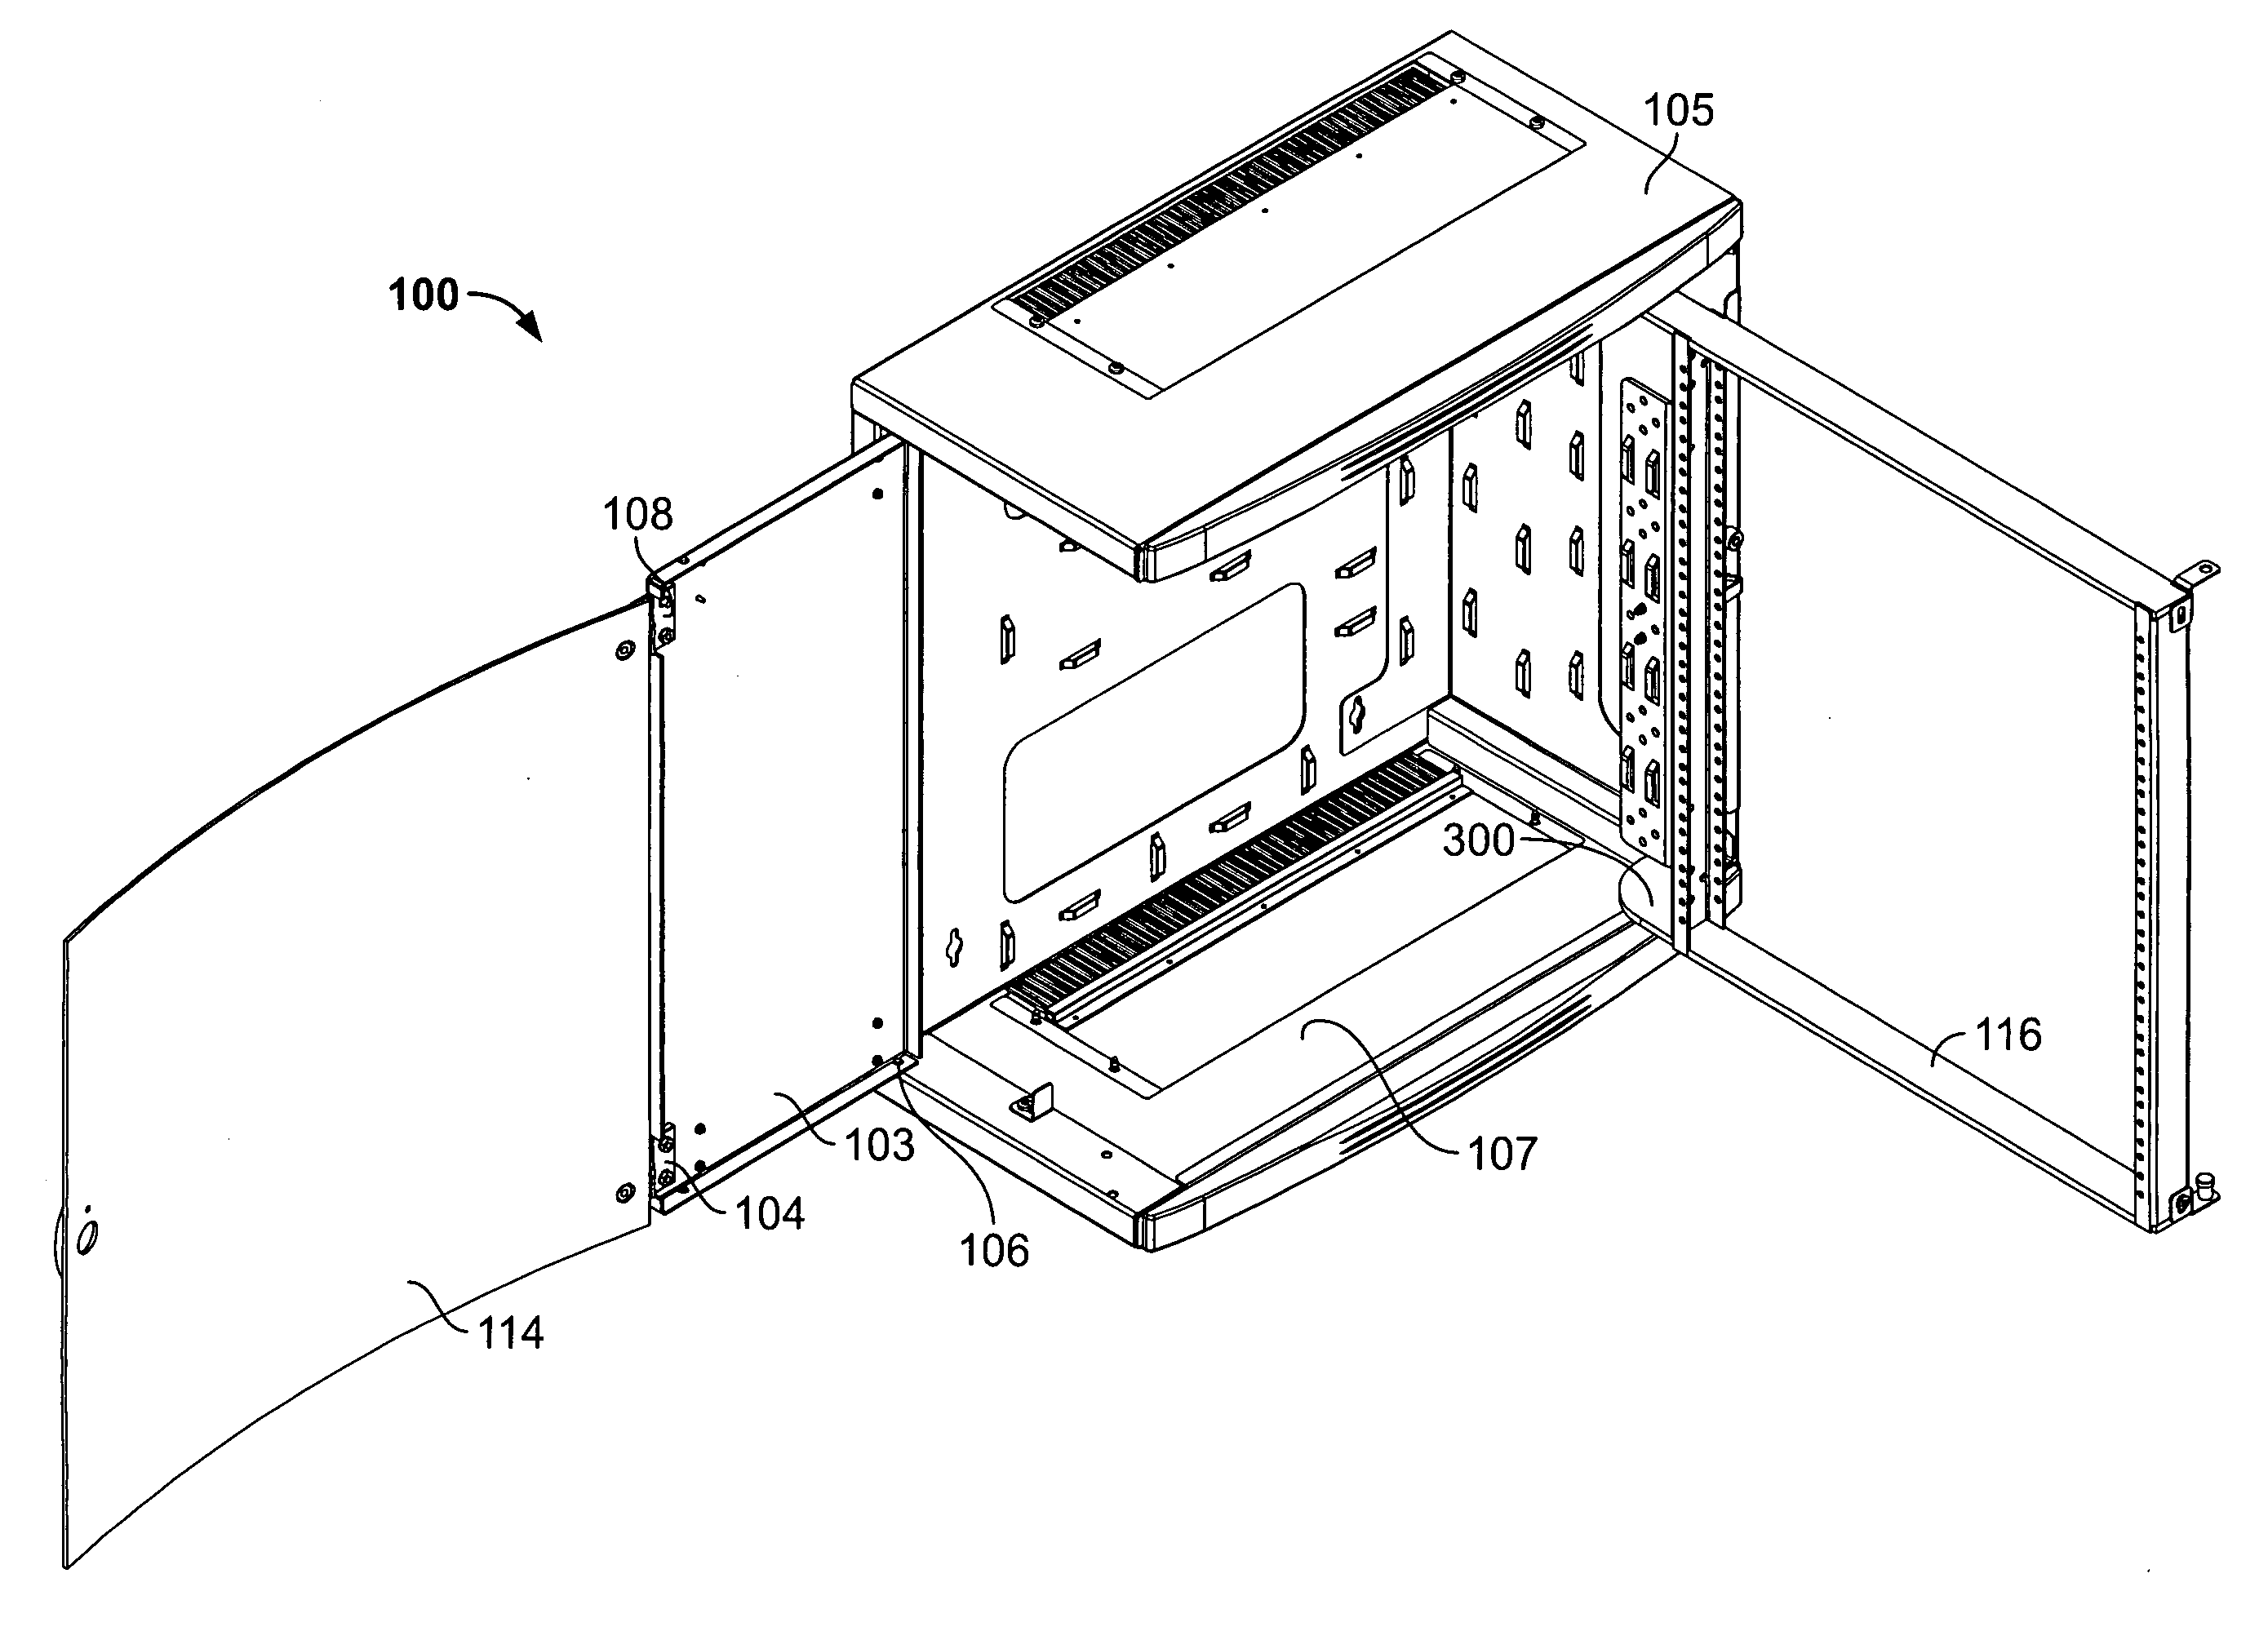 Modular telecommunications frame and enclosure assembly